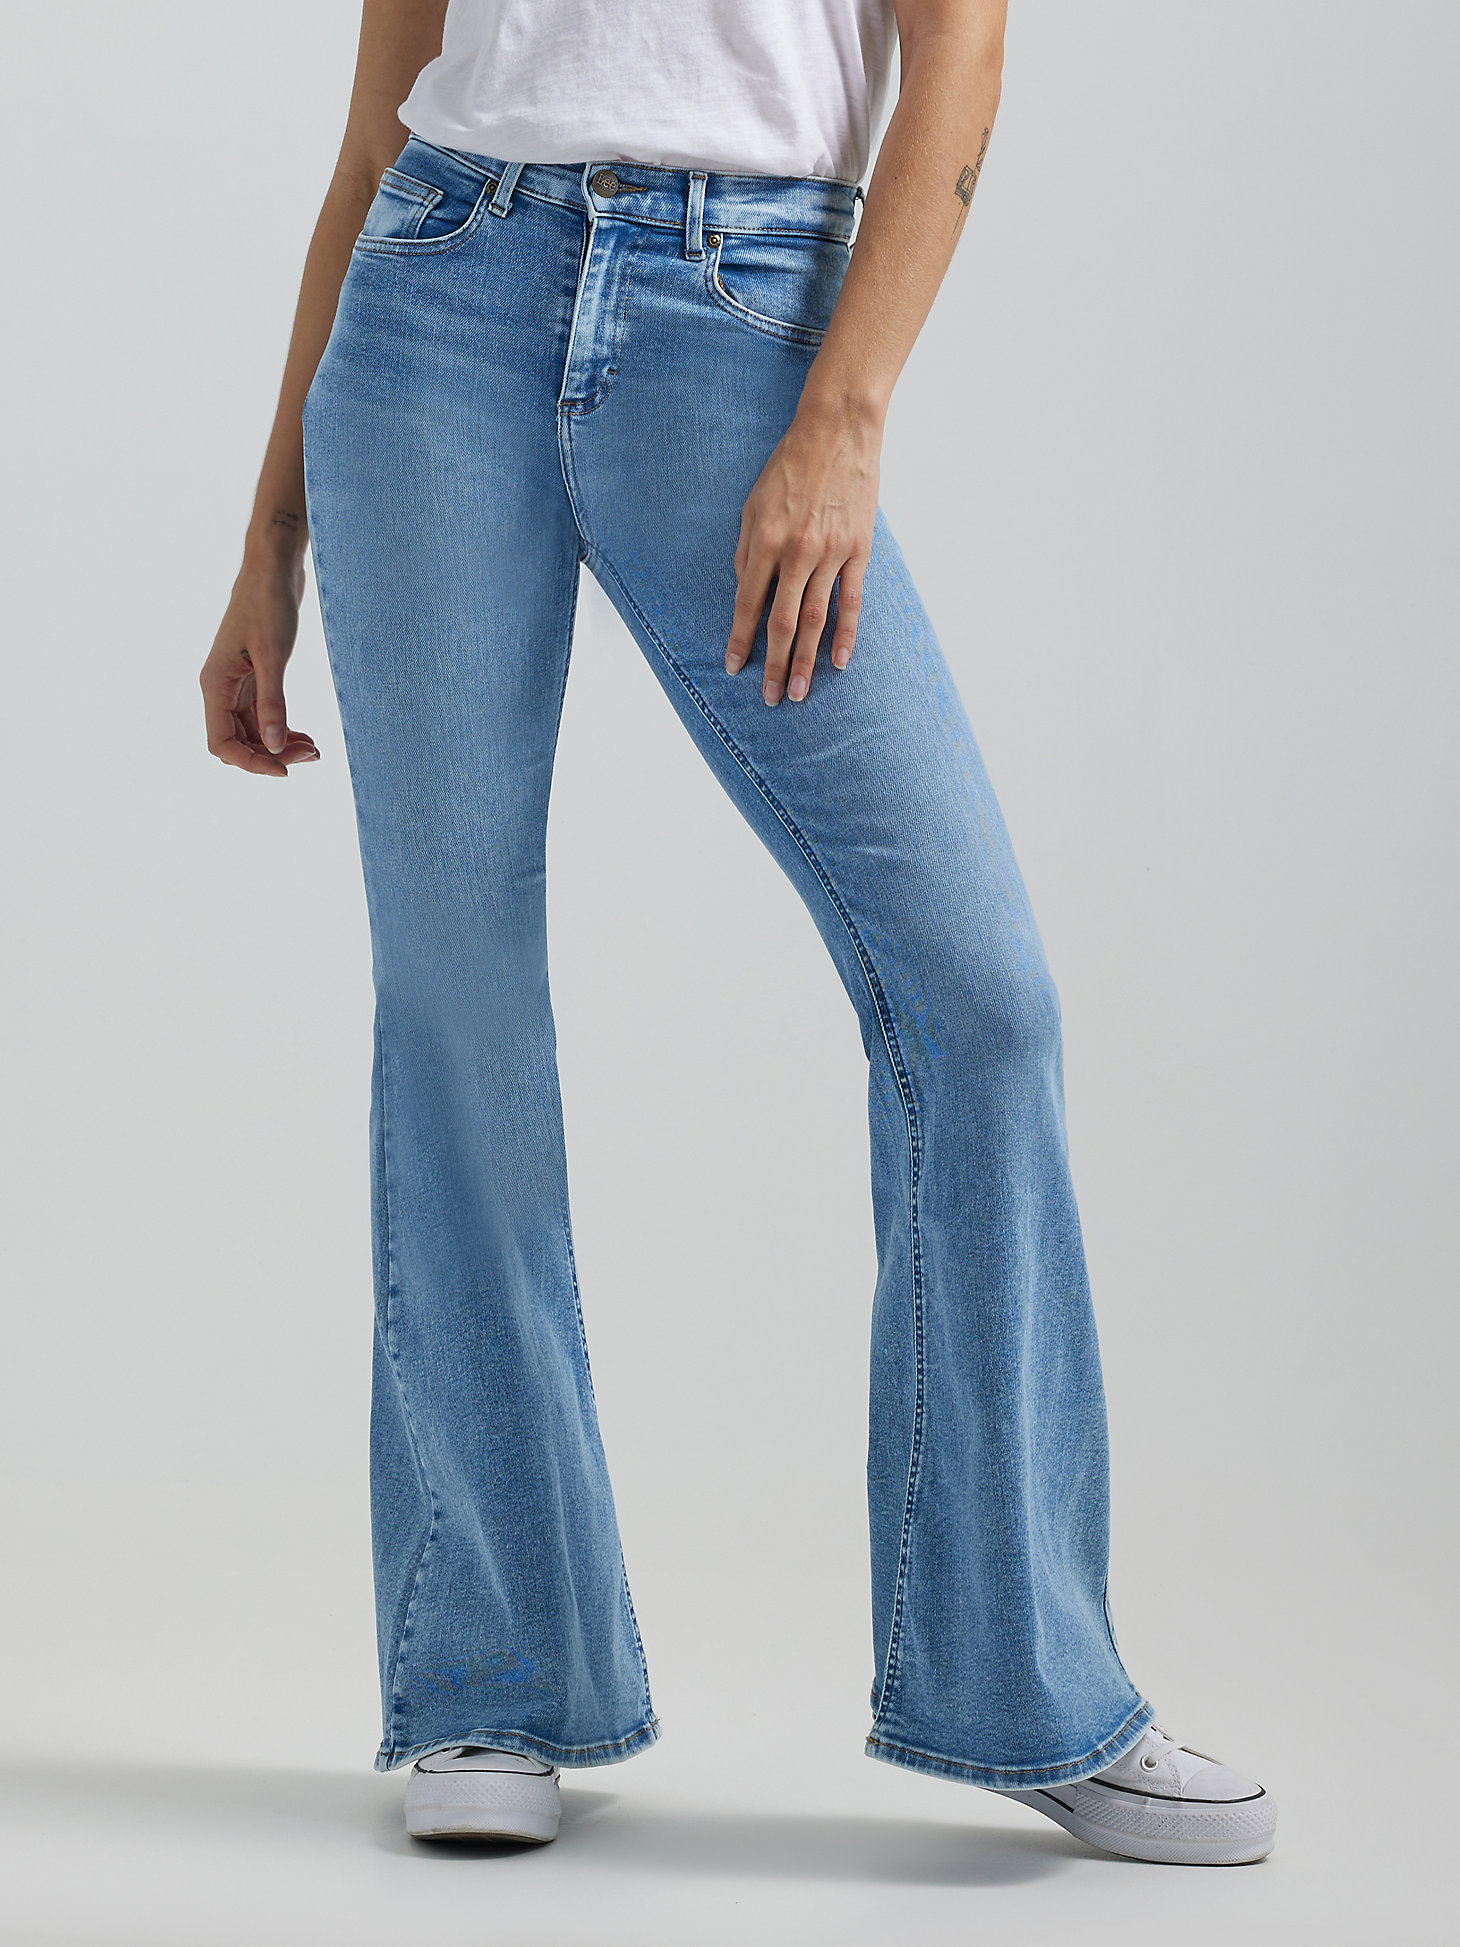 Women's Vintage Modern High Rise Ever Fit™ Flare Jean in Rushing In Light alternative view 3